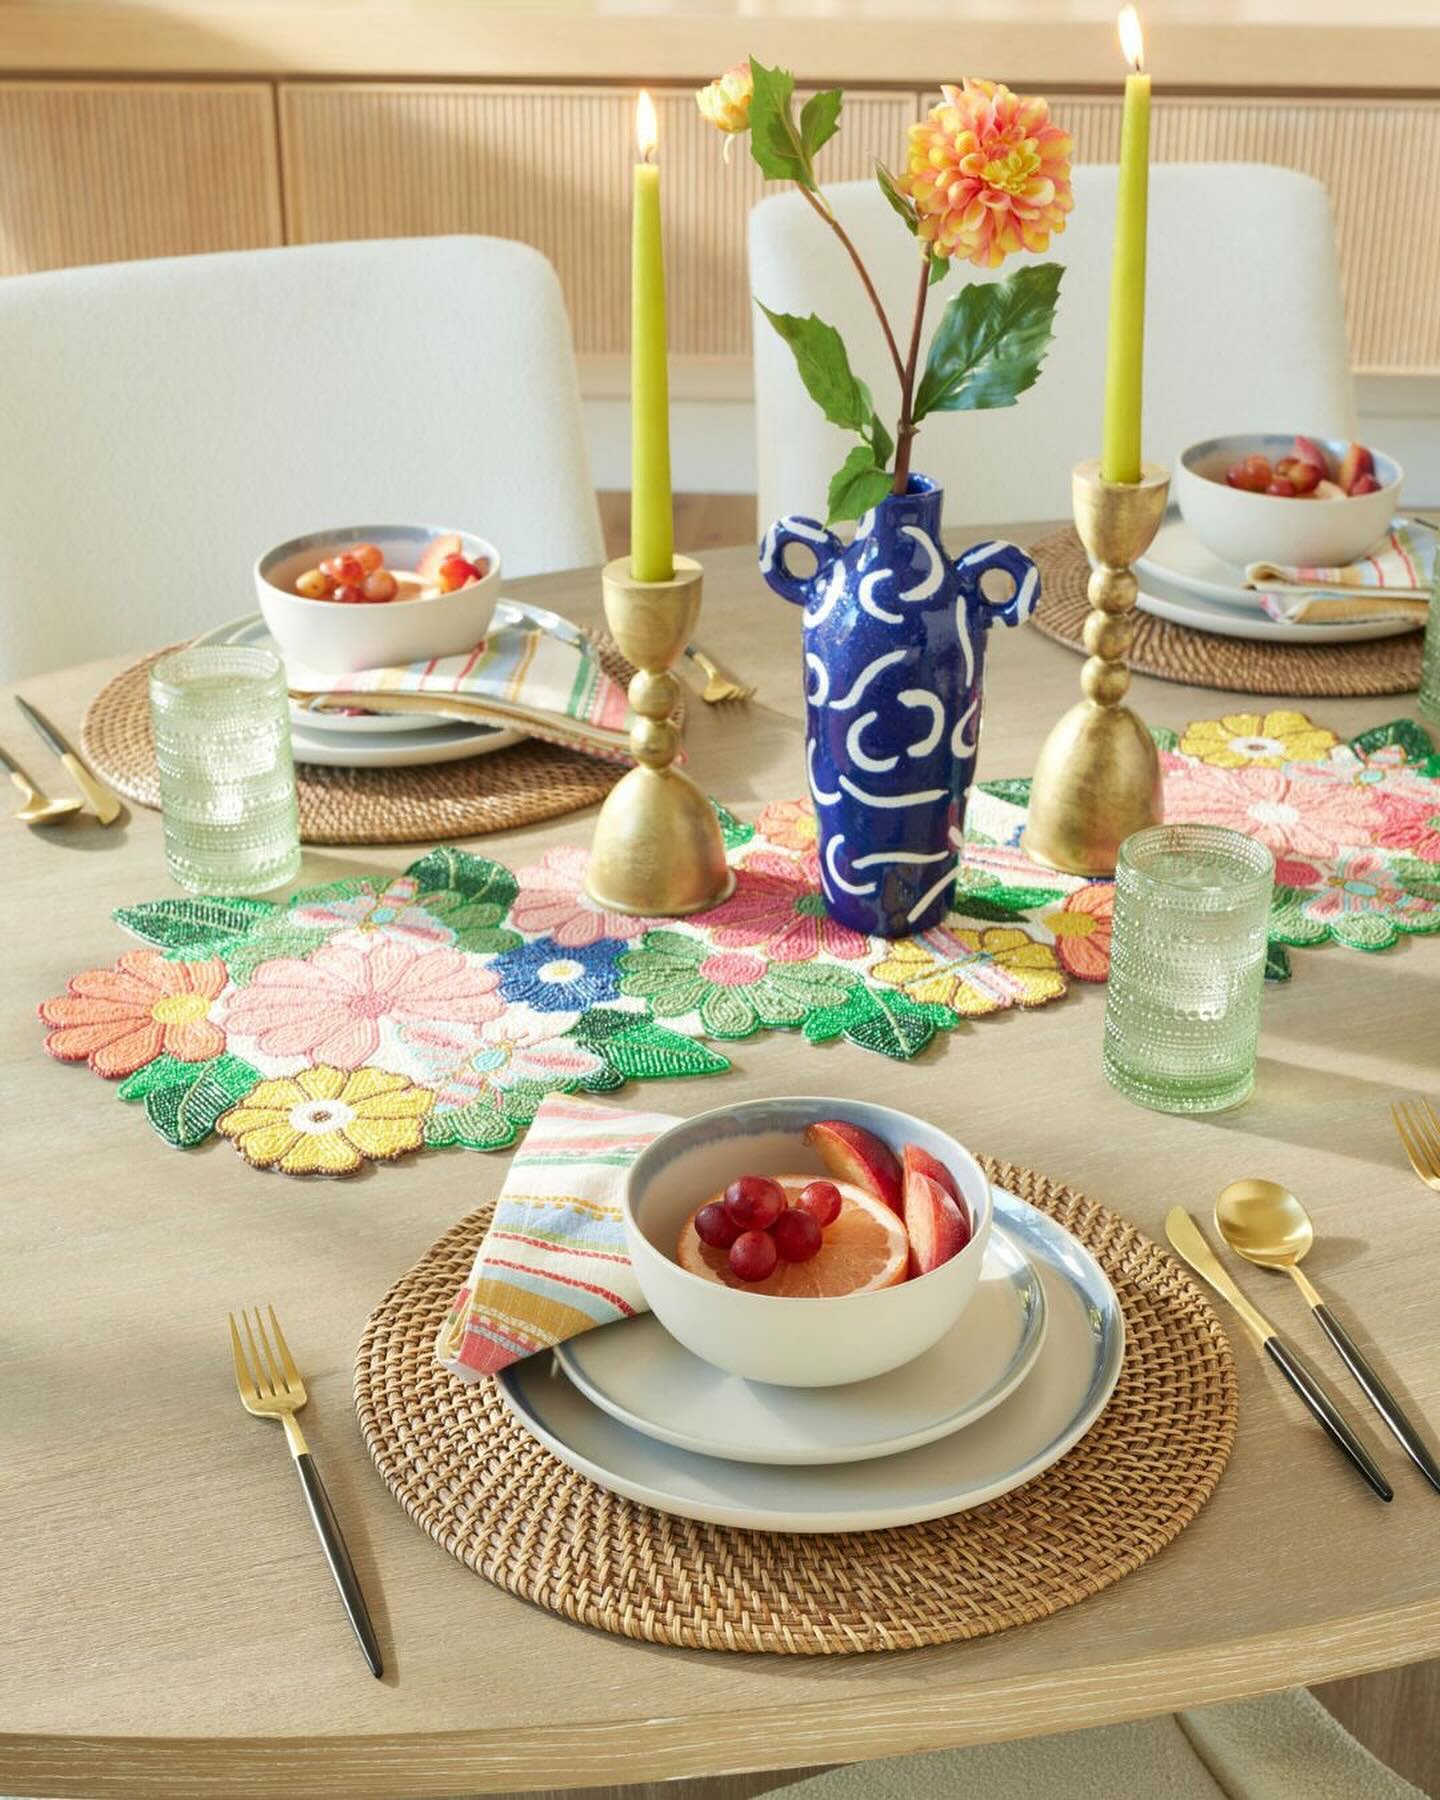 Three beautiful and spring-forward table settings styled by the talented Jane Hartmann (@janehartmannstylist) for @worldmarket. 🍽 Which one is more your vibe? Comment below! 

LuLu Stylist: Jane Hartmann / @janehartmannstylist
LuLu Styling Assistant